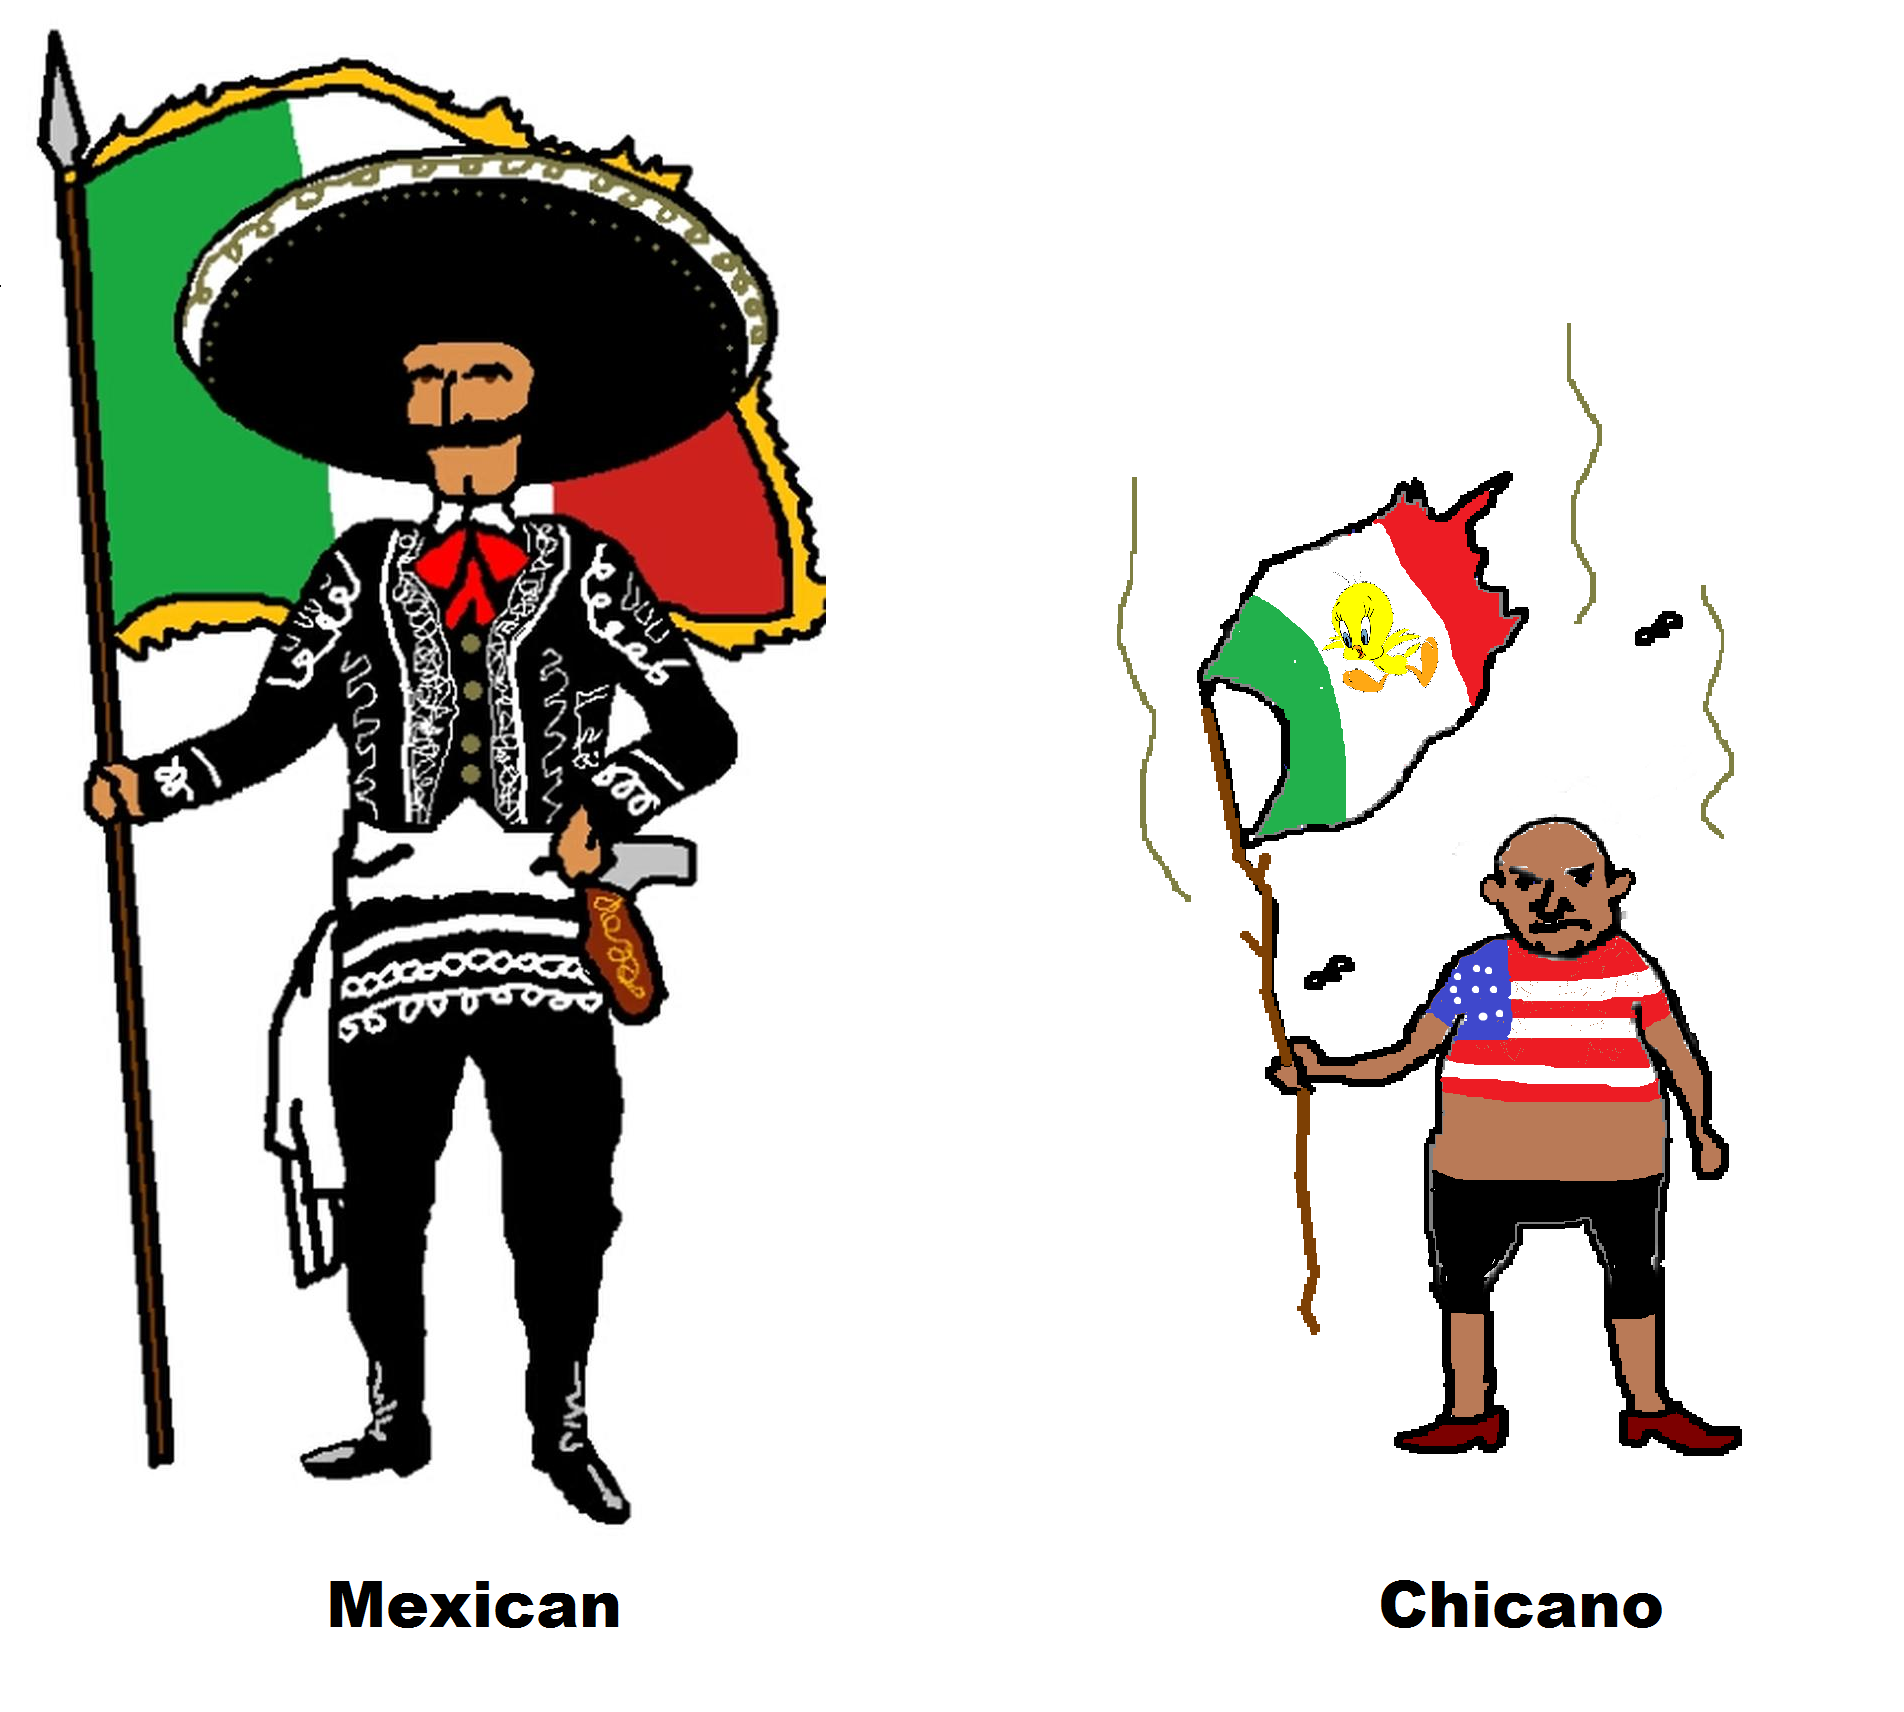 chicano vs mexican.png.